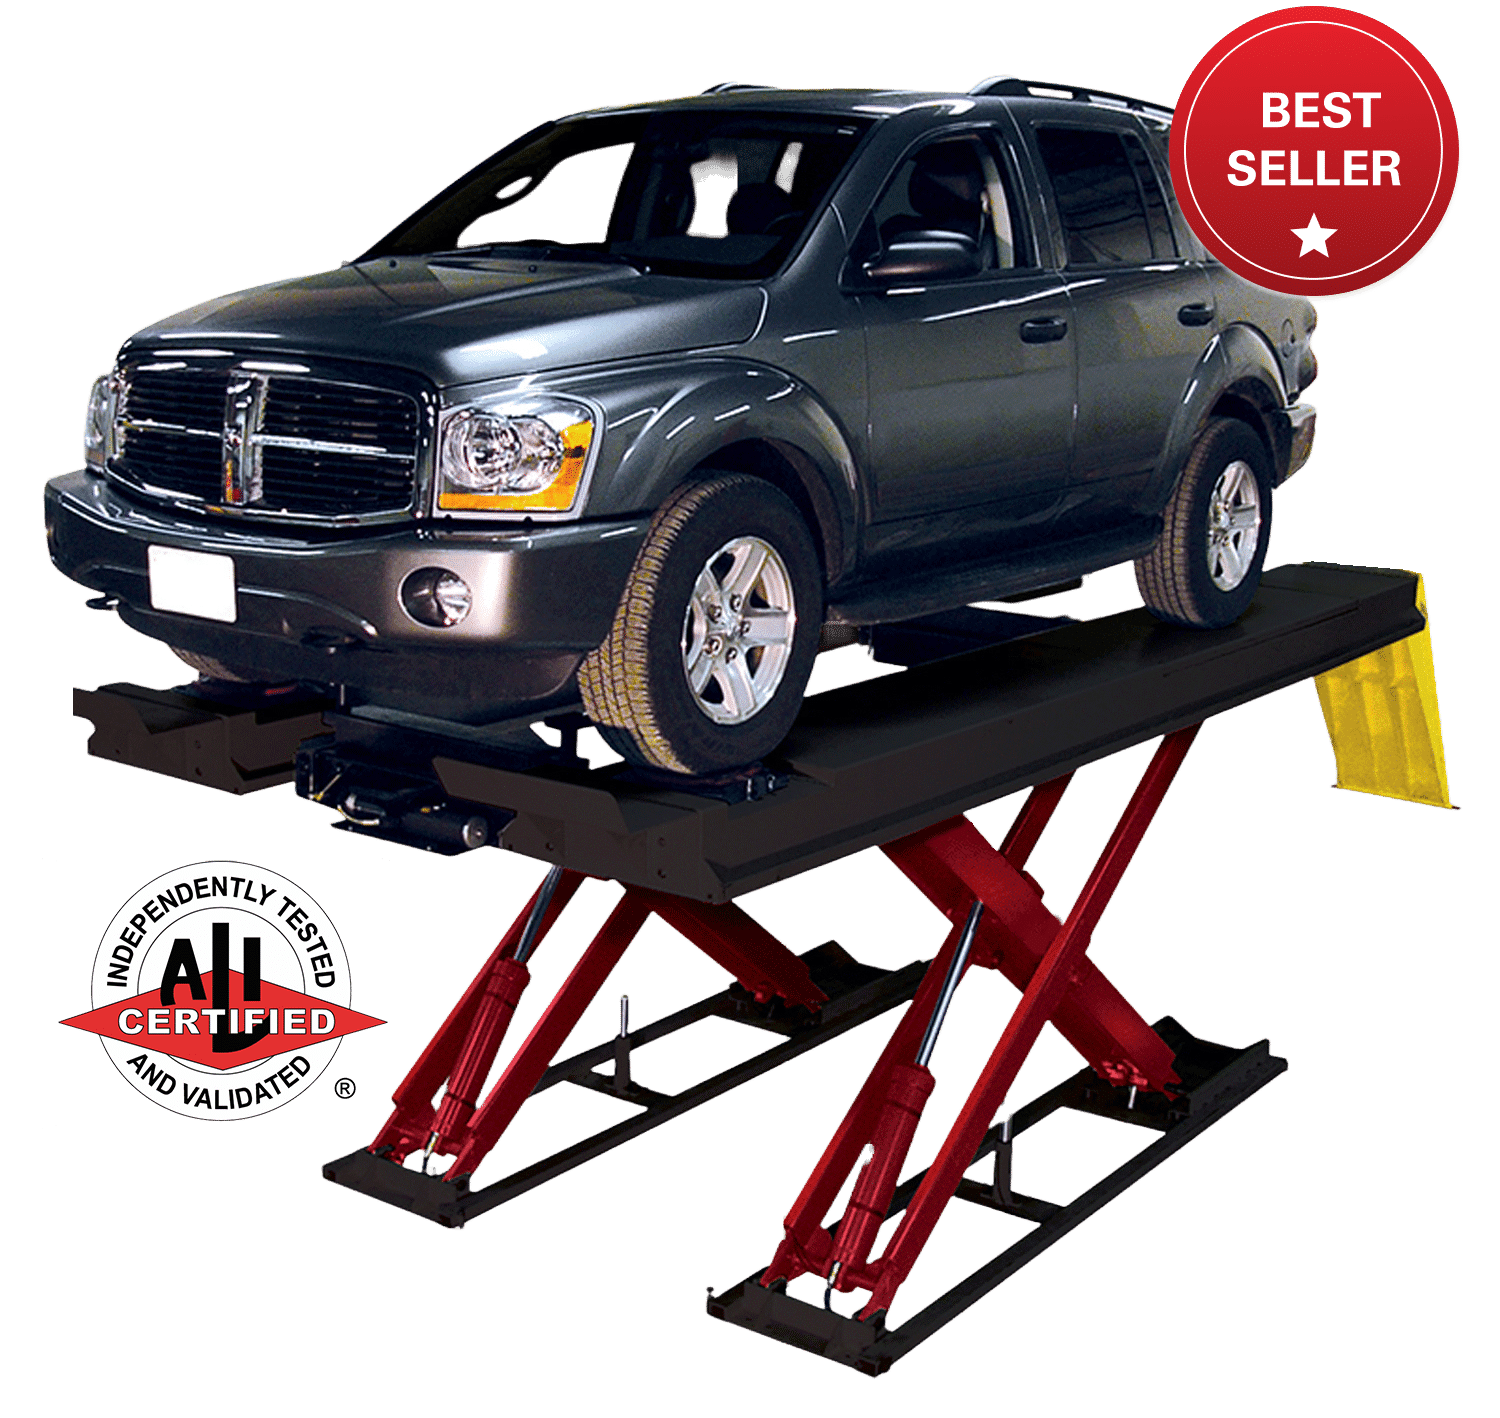 A black SUV is raised on a black and red Coats 16K alignment scissor lift with a white and red logo that says “ALI Certified” and a 